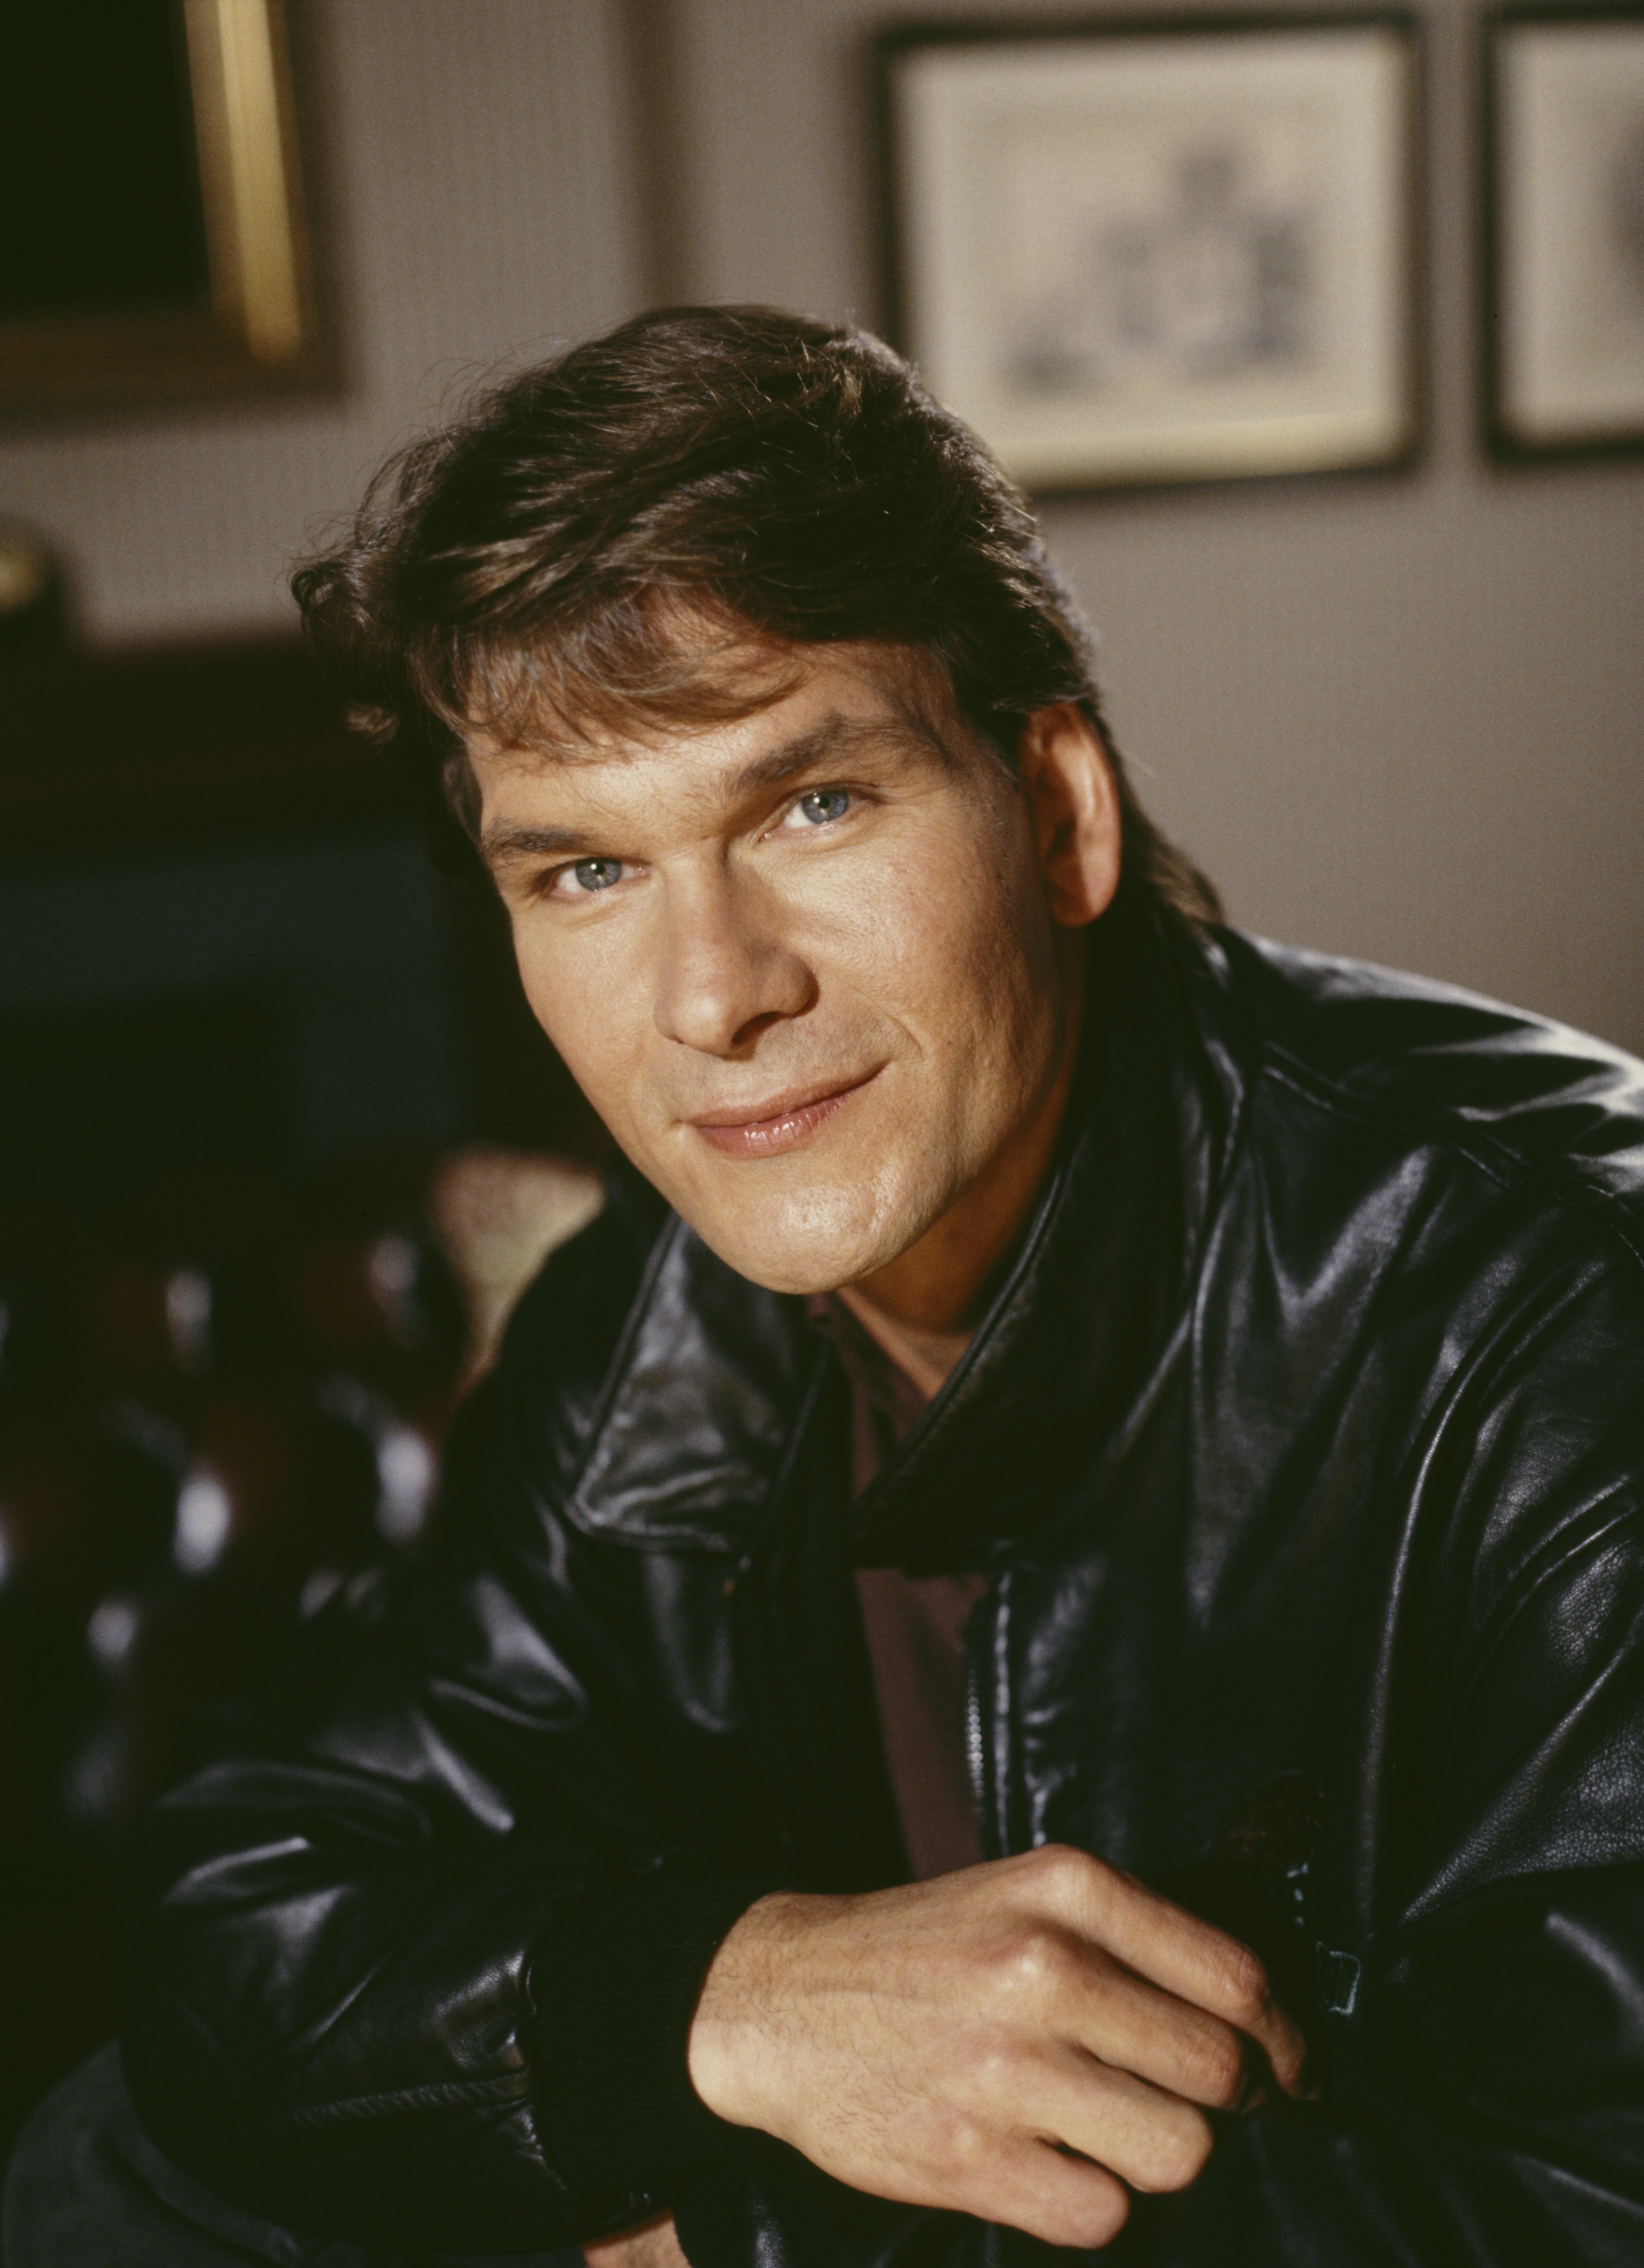 Patrick Swayze photographed in 1990. | Source: Getty Images